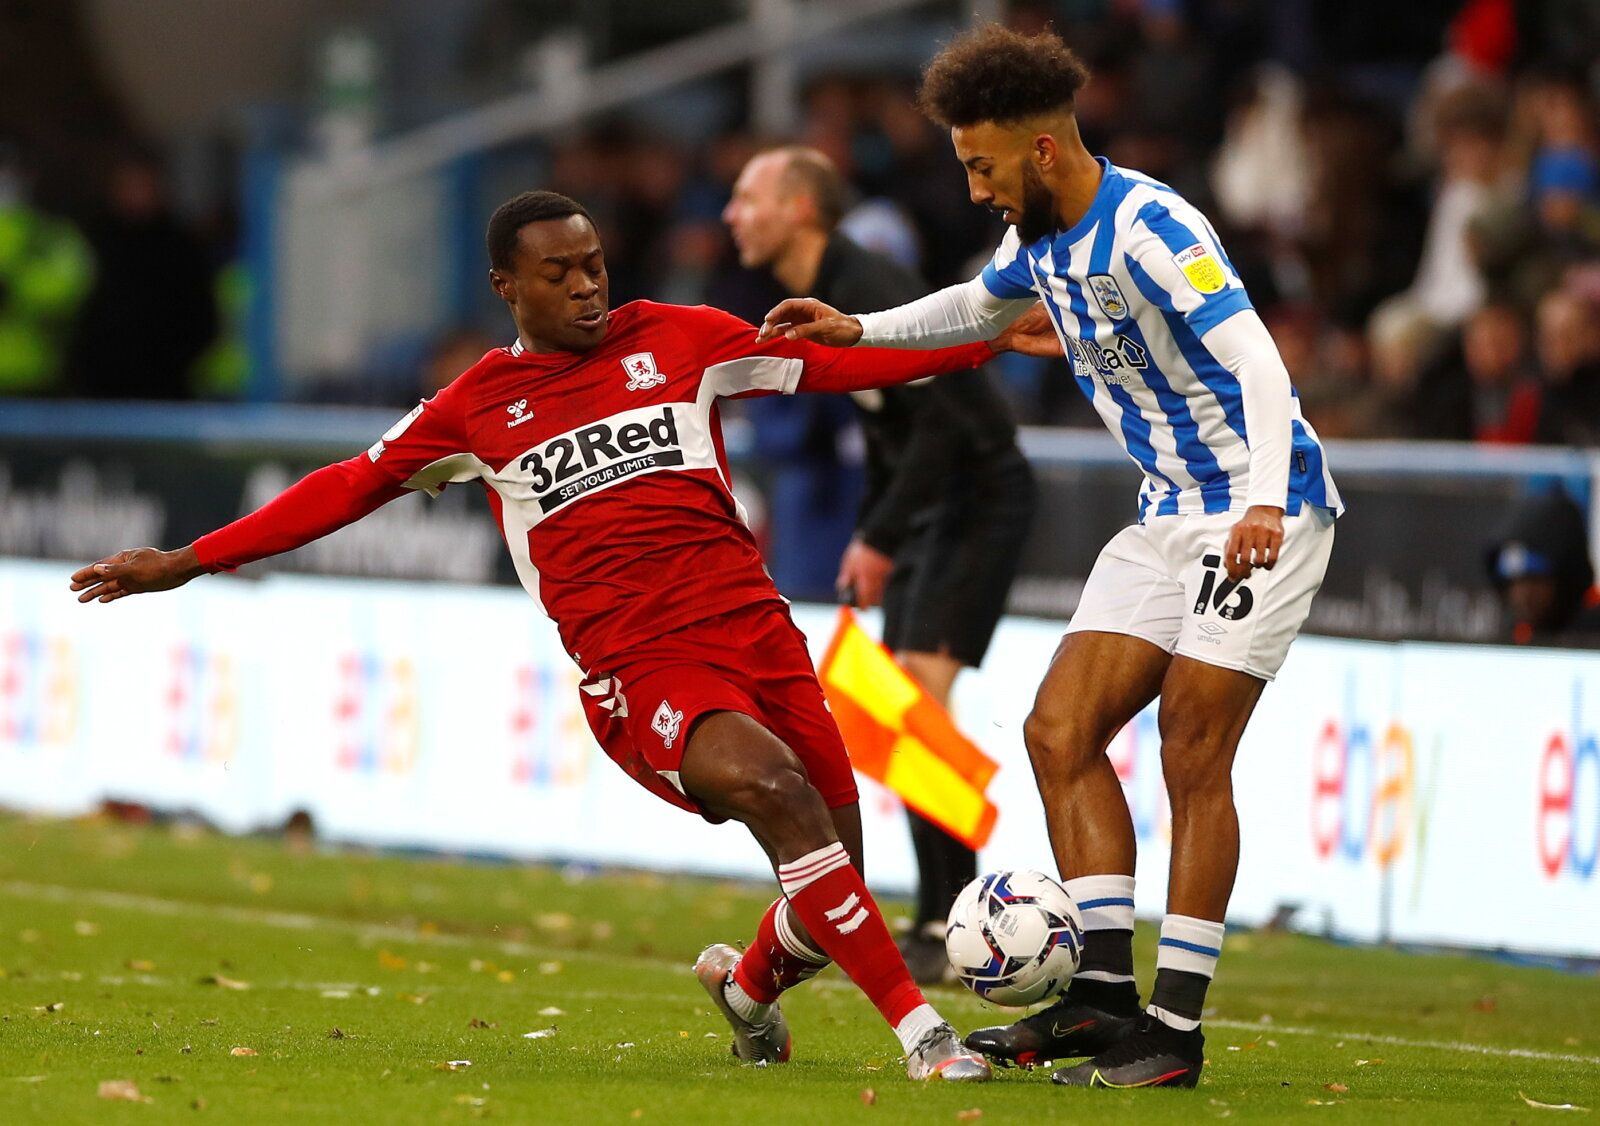 Soccer Football - Championship - Huddersfield Town v Middlesbrough - John Smith's Stadium, Huddersfield, Britain - November 27, 2021 Middlesbrough's Marc Bola in action with Huddersfield Town's Sorba Thomas   Action Images/Jason Cairnduff